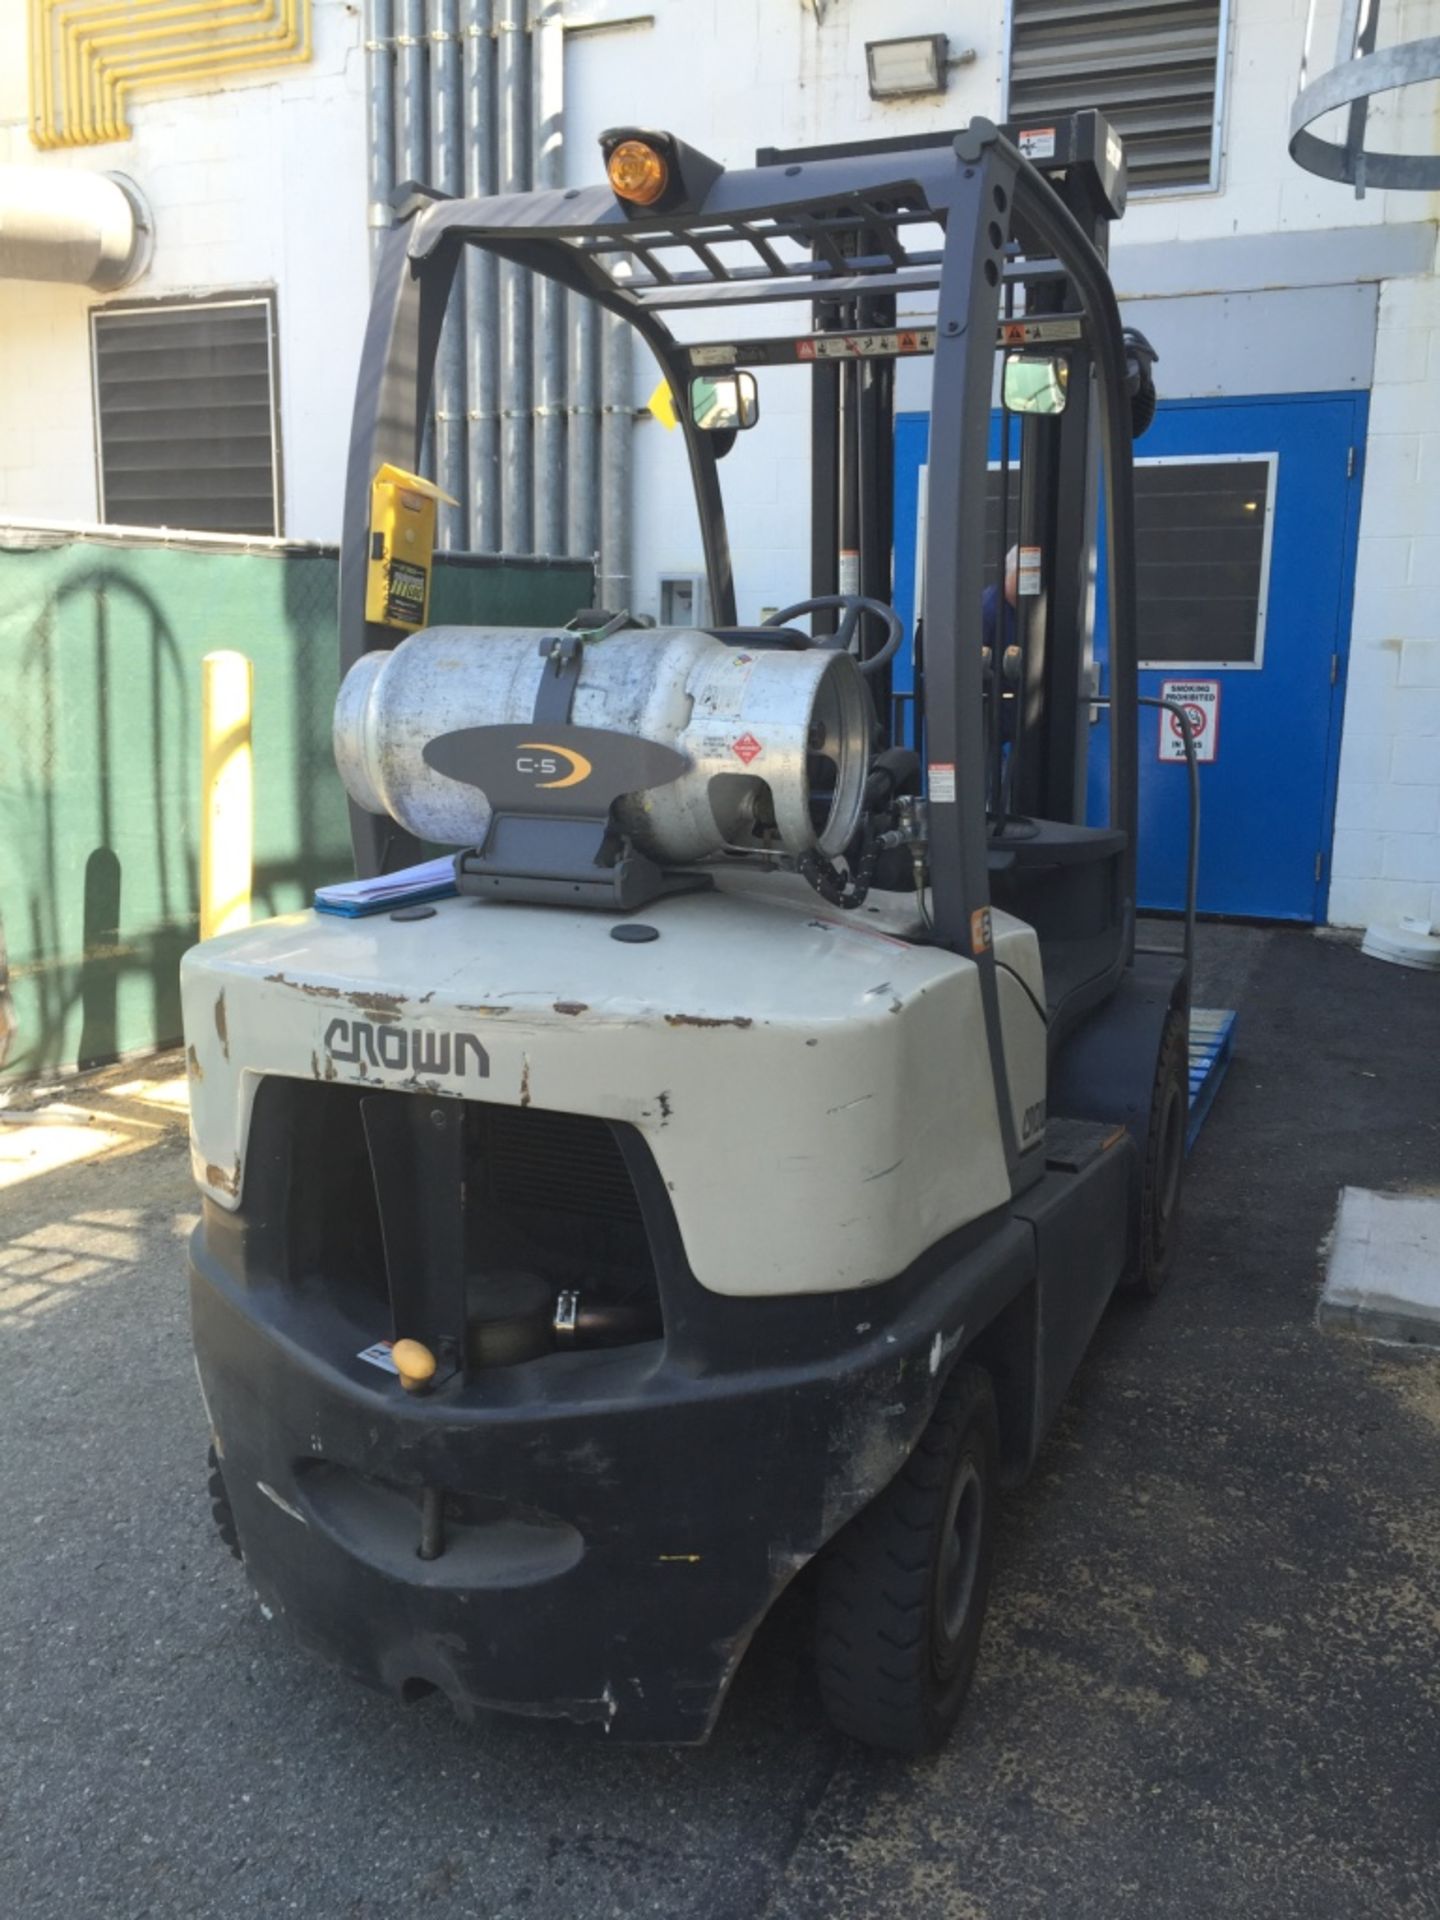 Crown Propane Fork Truck, Rigging Fee $75, If Crating or Lumber is Needed Add Additional $50 - Image 4 of 7